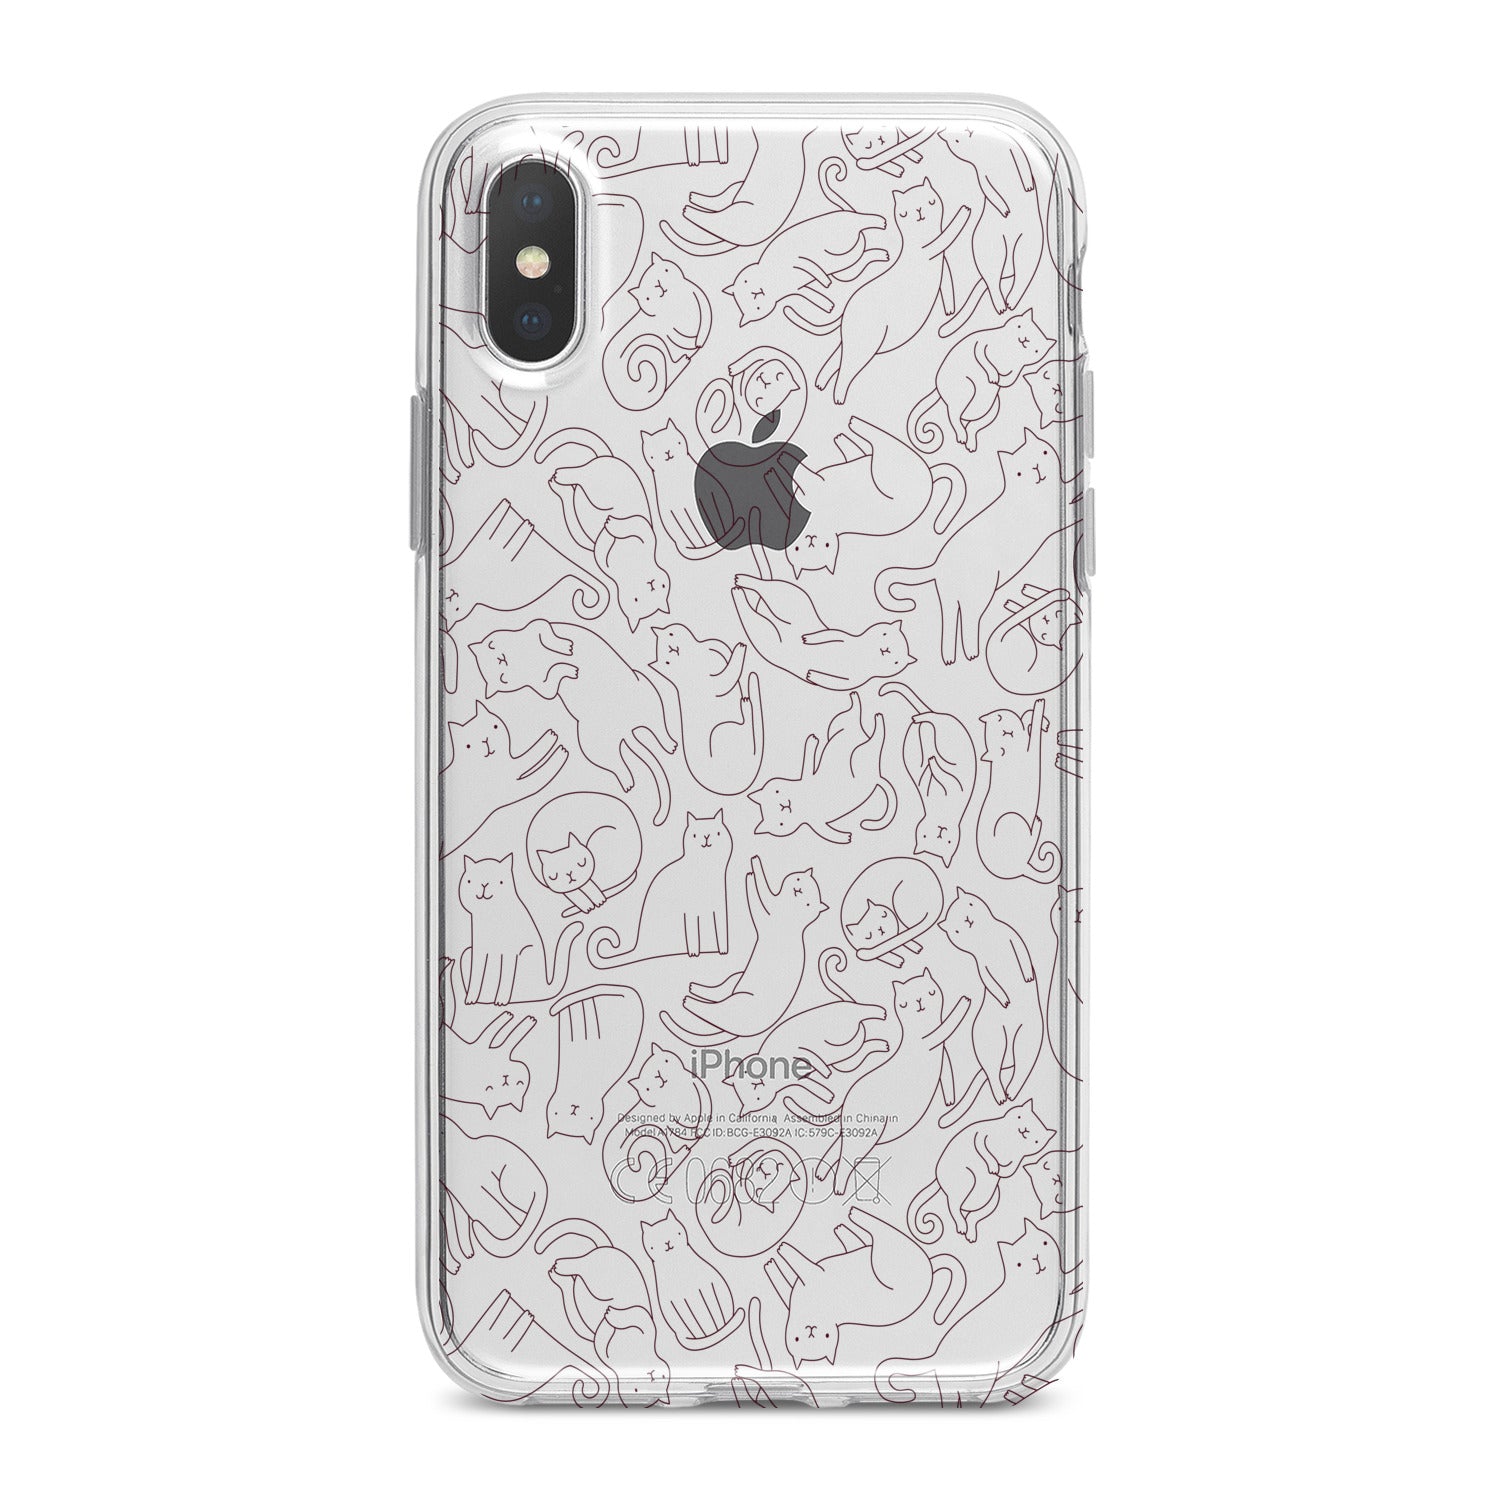 Lex Altern Drawing Cats Pattern Phone Case for your iPhone & Android phone.